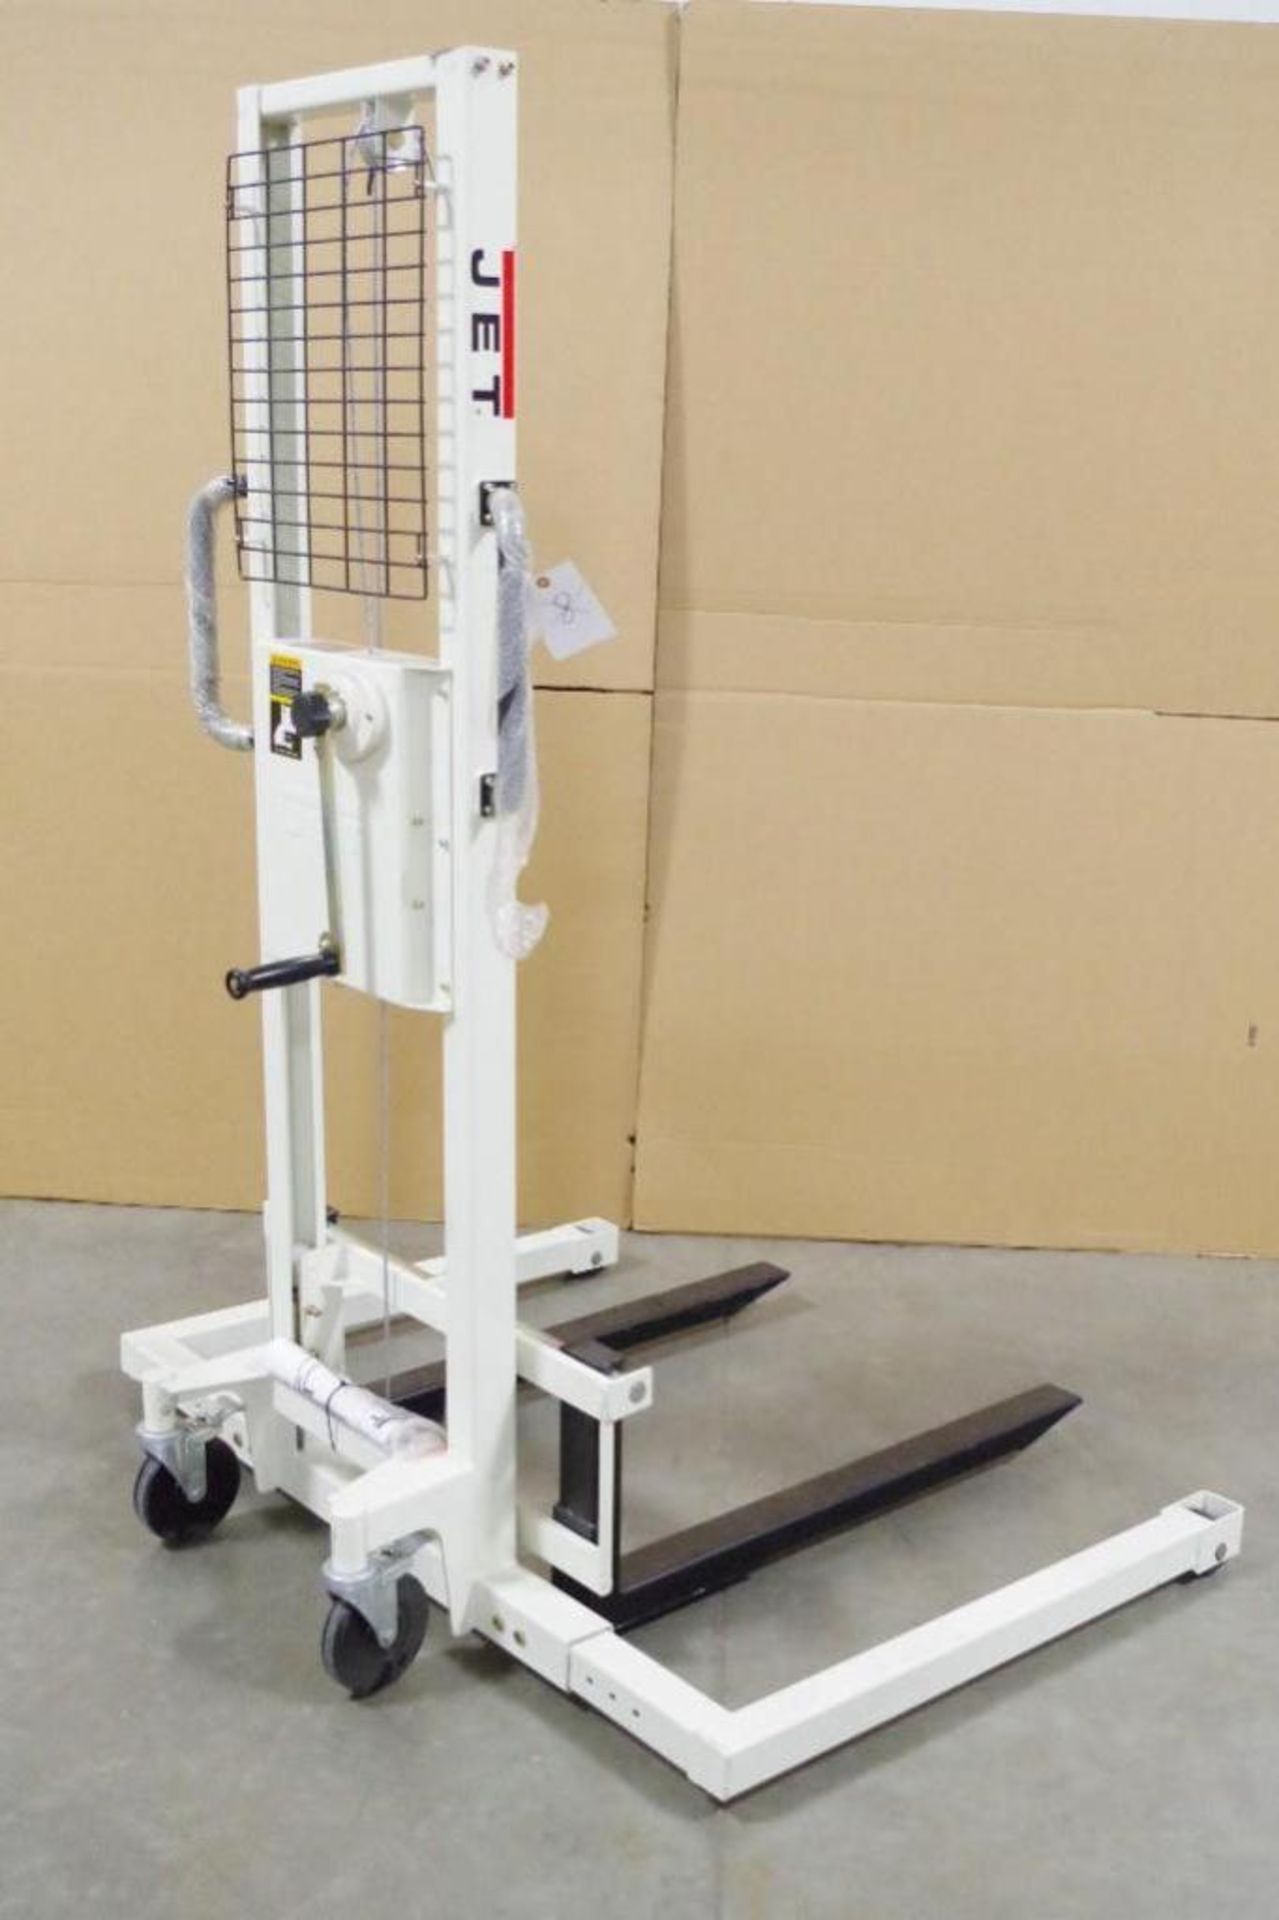 NEW JET Winch Stacker, 770 lbs. Capacity, 59" Lift Height, 18" Load Center - Image 3 of 5